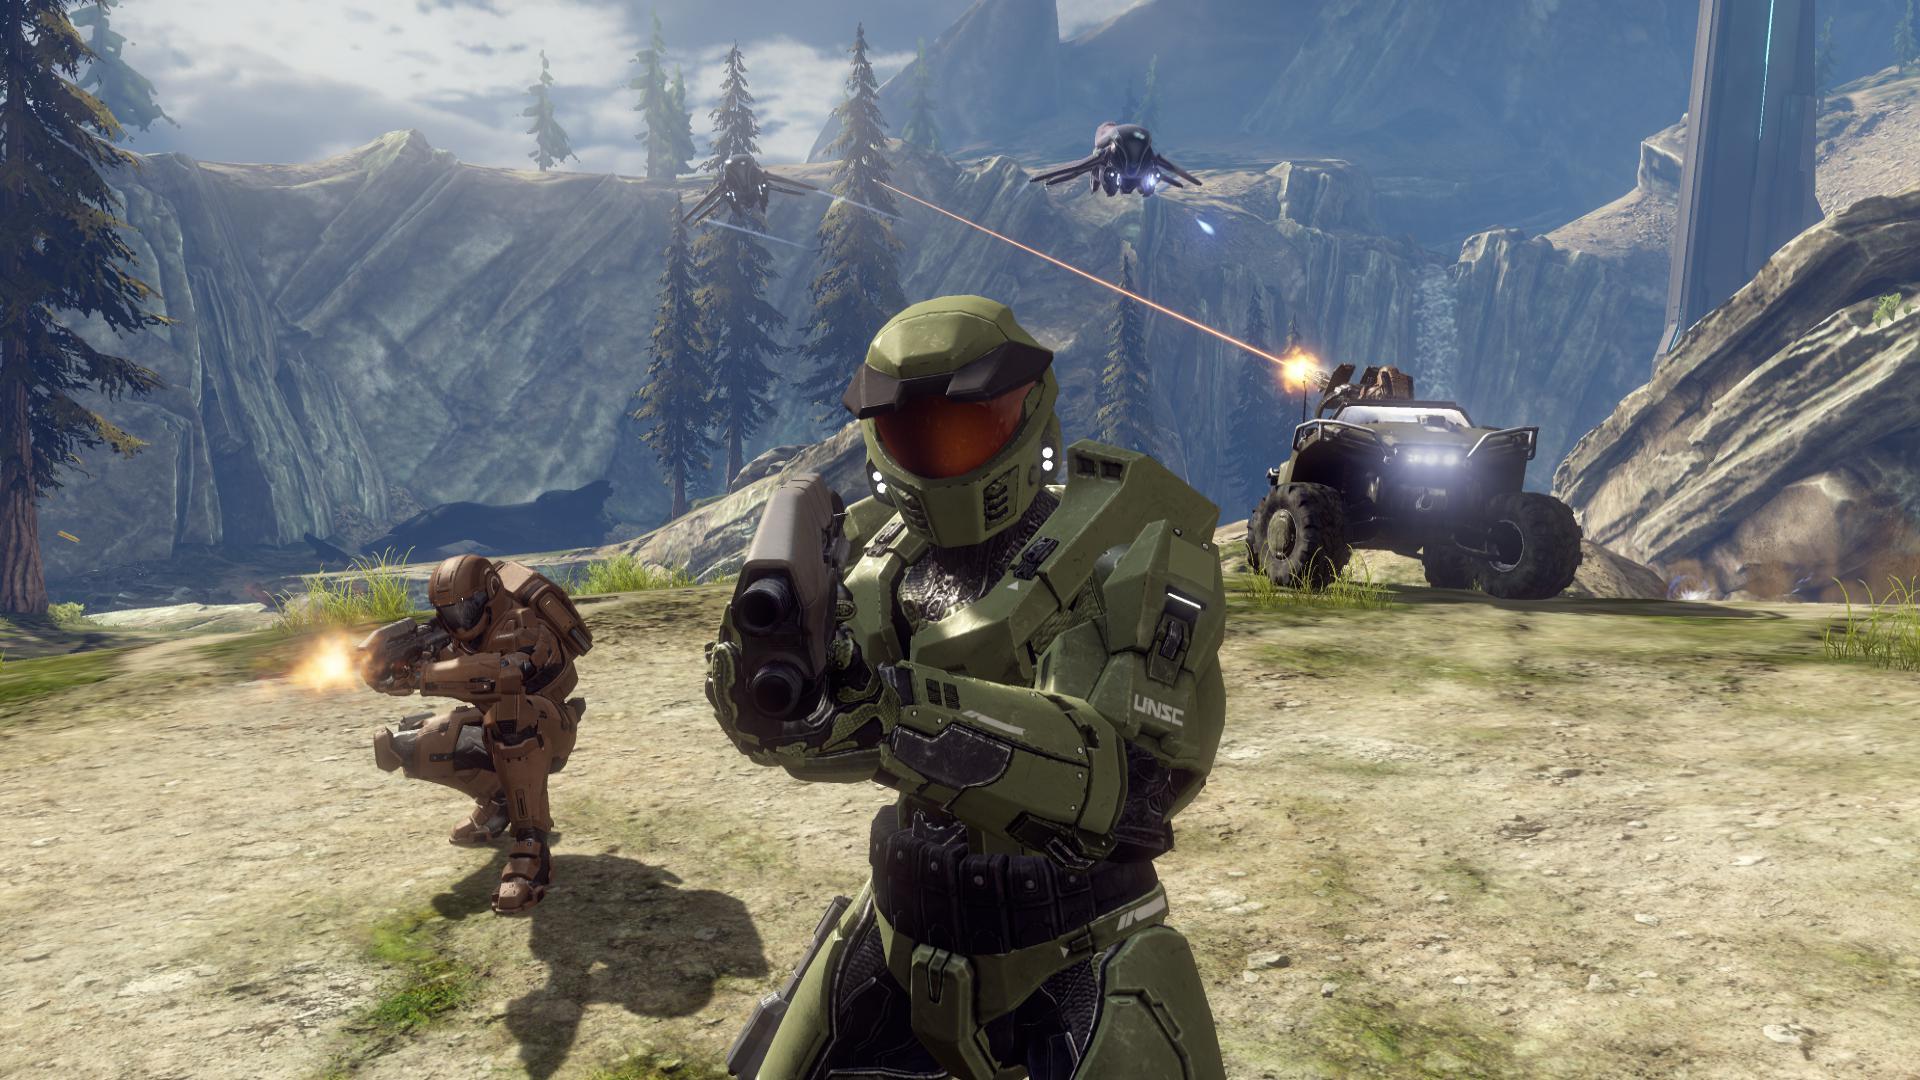 We finally know how Halo: Combat Evolved got its name